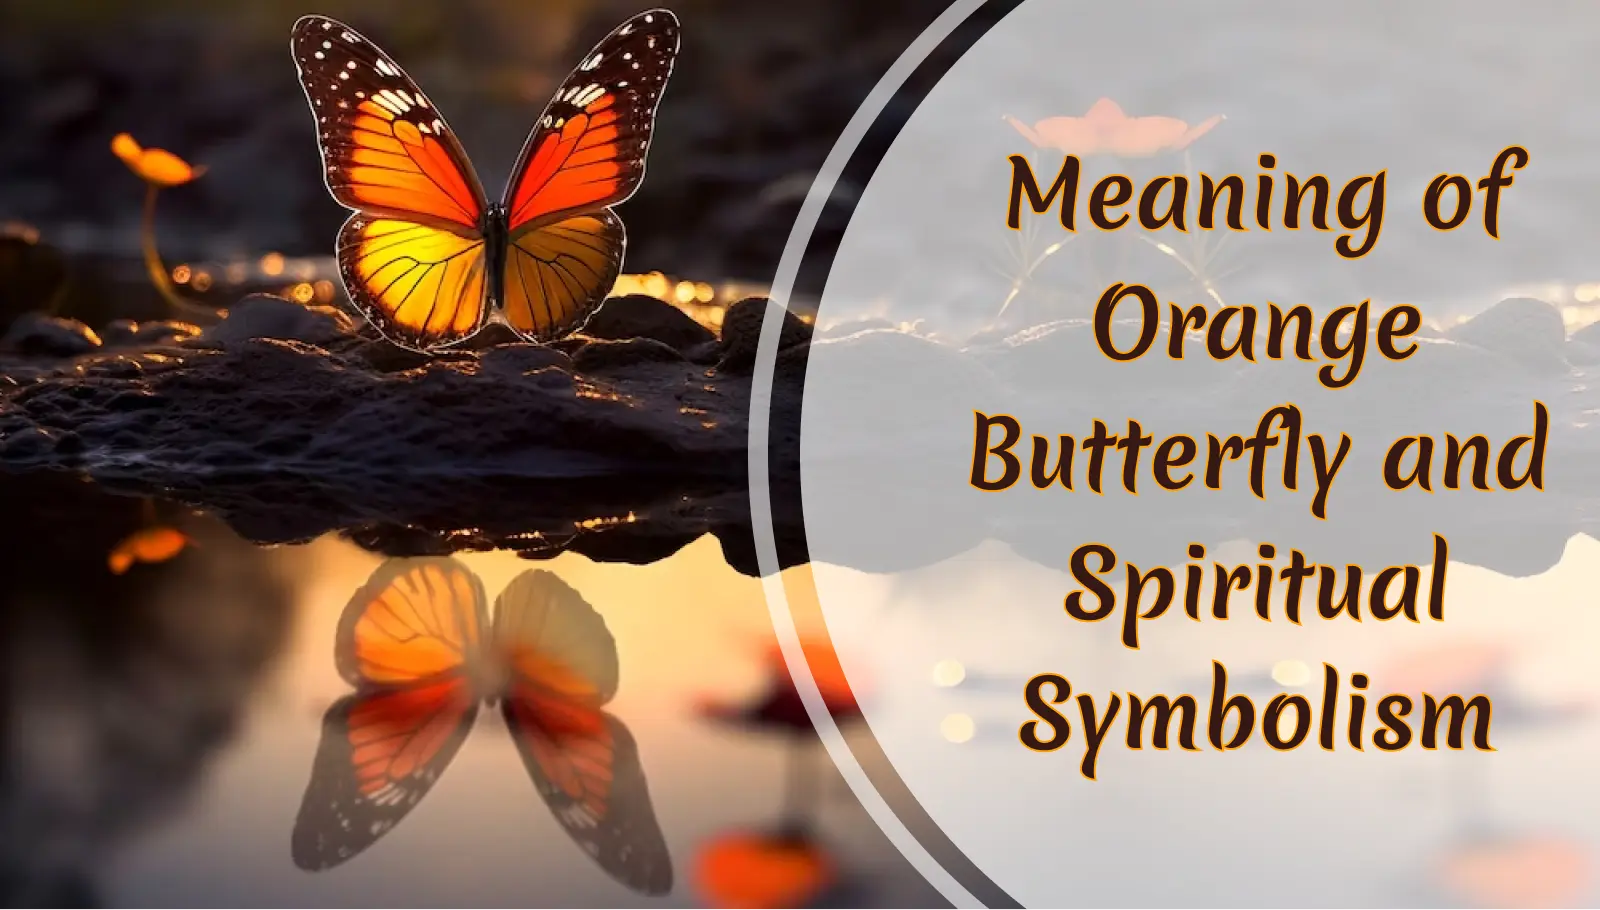 Meaning of Orange Butterfly and Spiritual Symbolism